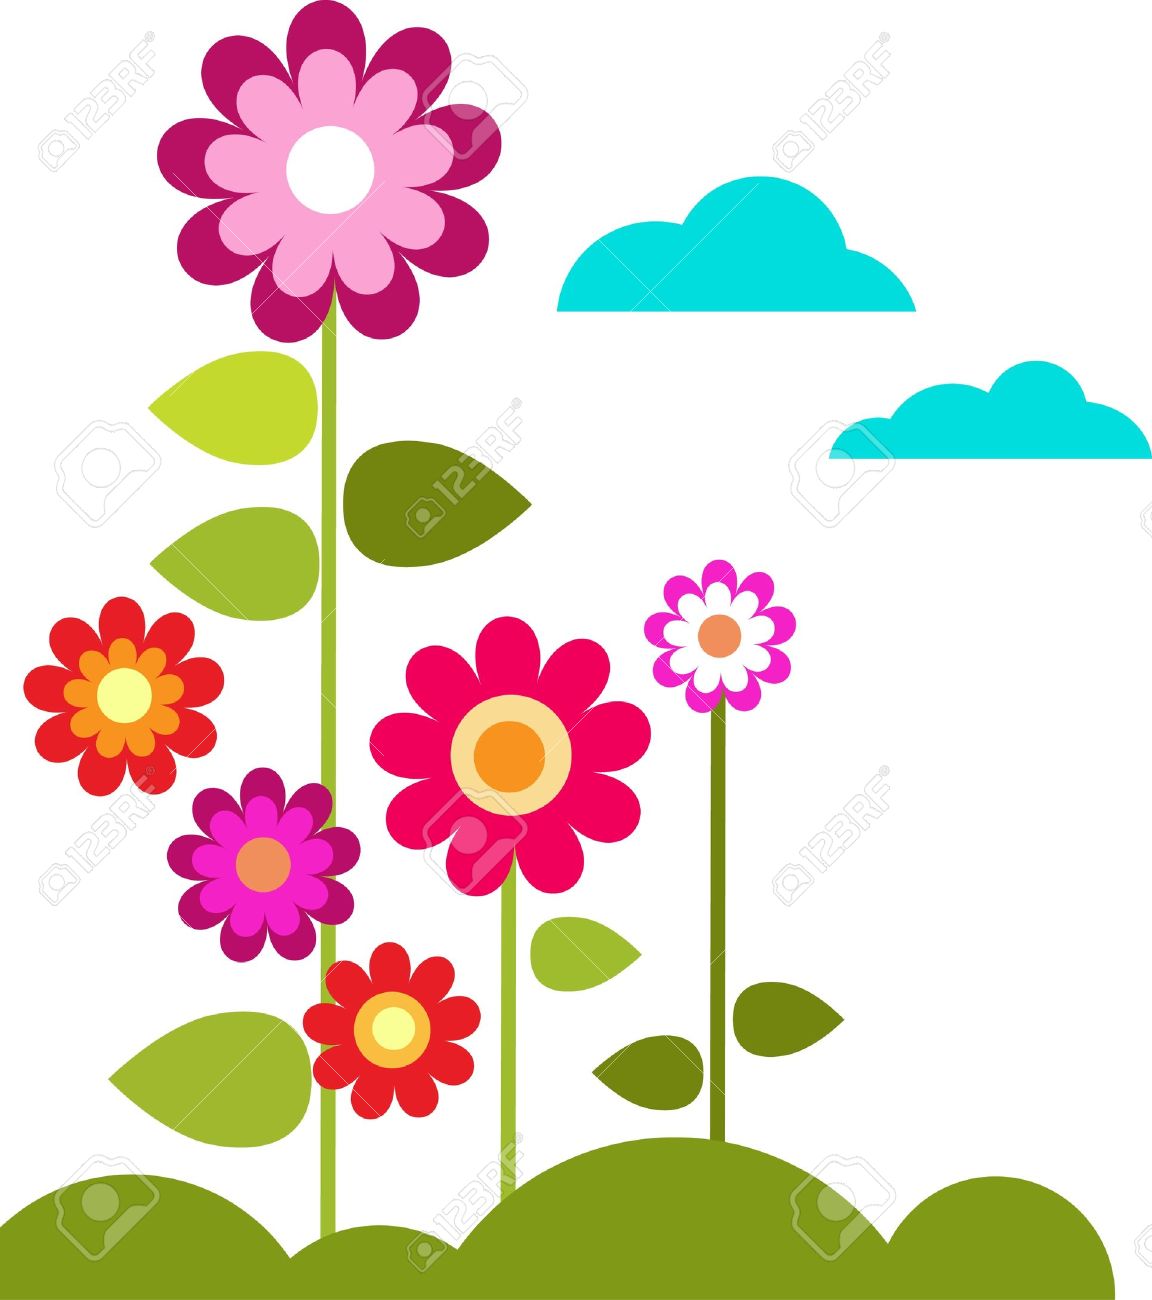 clipart meadow flowers - photo #31